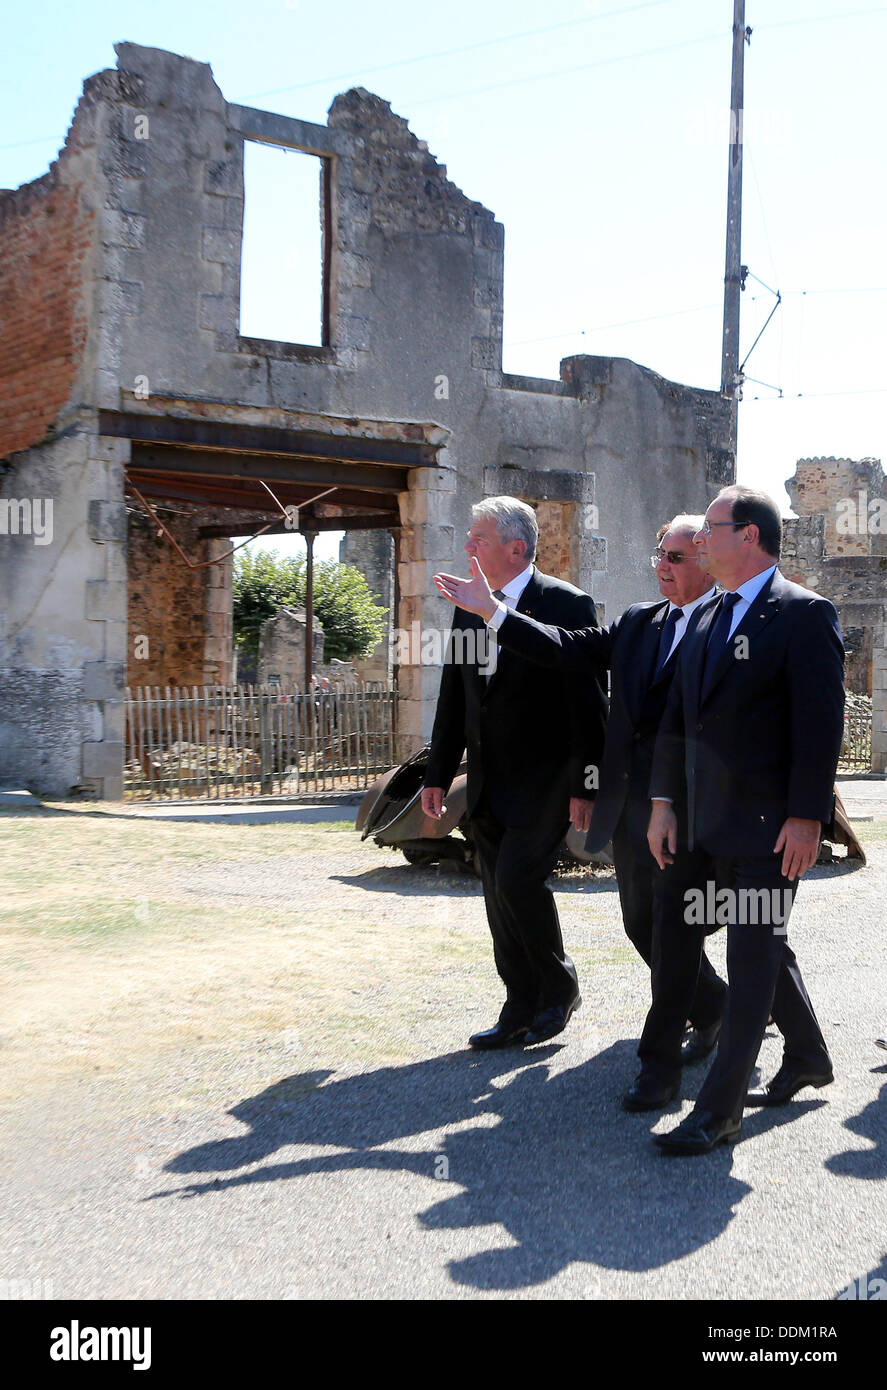 Oradour-sur-Glane, France. 04th Sep, 2013. German President Joachim Gauck (L), French President Francois Hollande (R) and survivor of the massacre in Oradour-sur-Glane during World War II Robert Hebras (R) are pictured at the memorial site in Oradour-sur-Glane, France, 04 September 2013. A unit of SS officers murdered 642 citizens of the town in June 1944. The German President is on a three-day visit to France. Photo: WOLFGANG KUMM/dpa/Alamy Live News Stock Photo